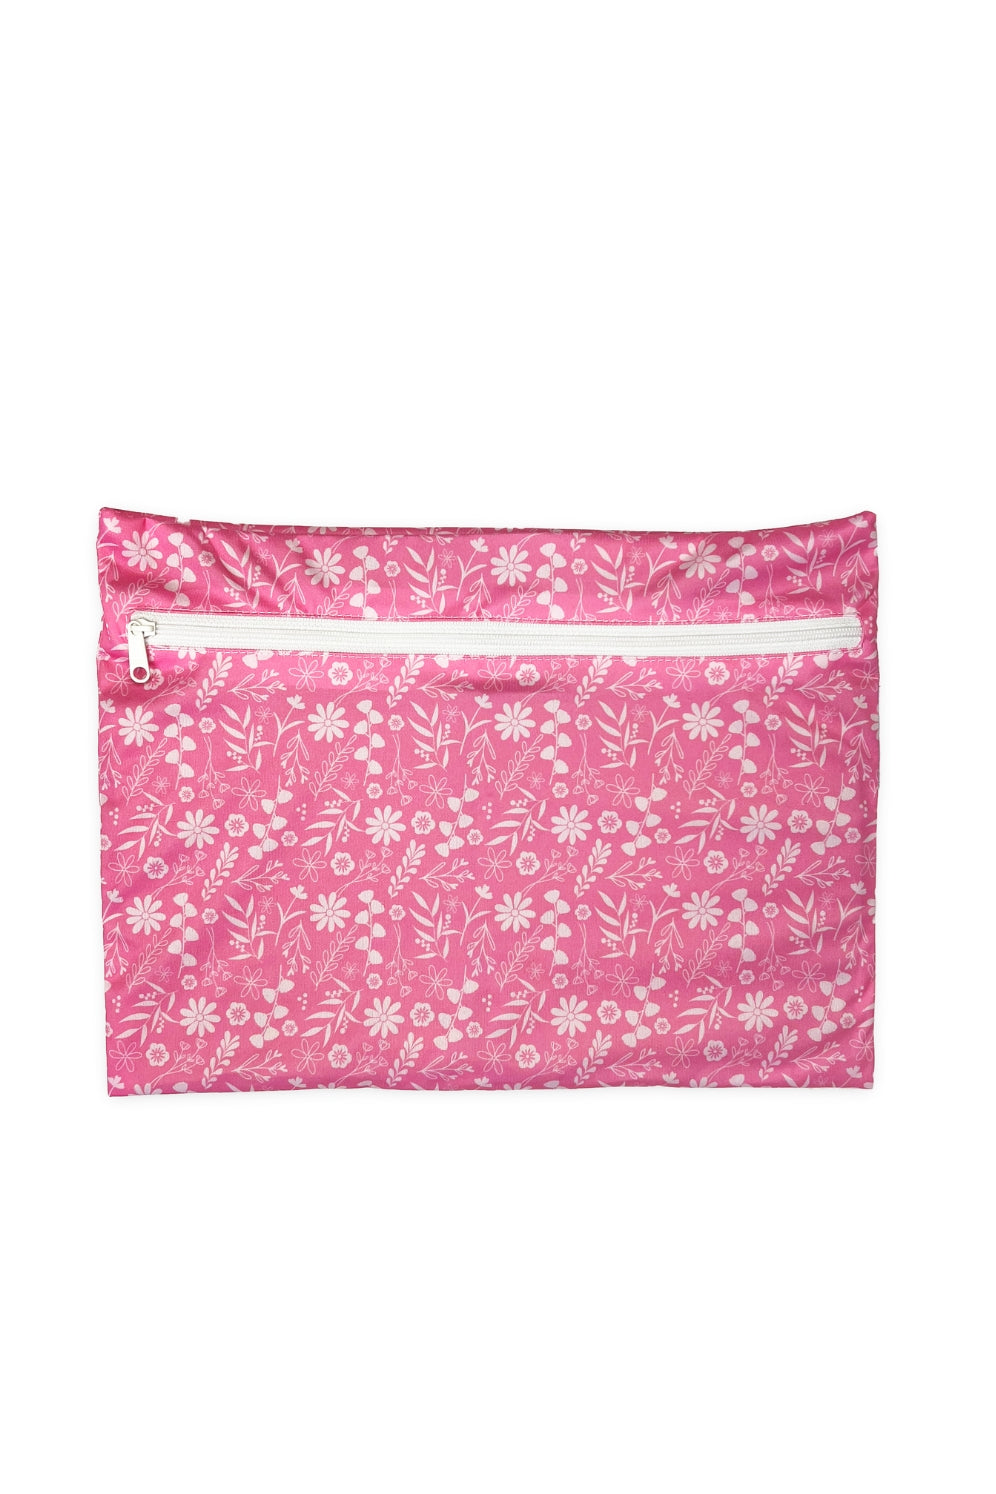 August Society Travel Pouch in Flowers print